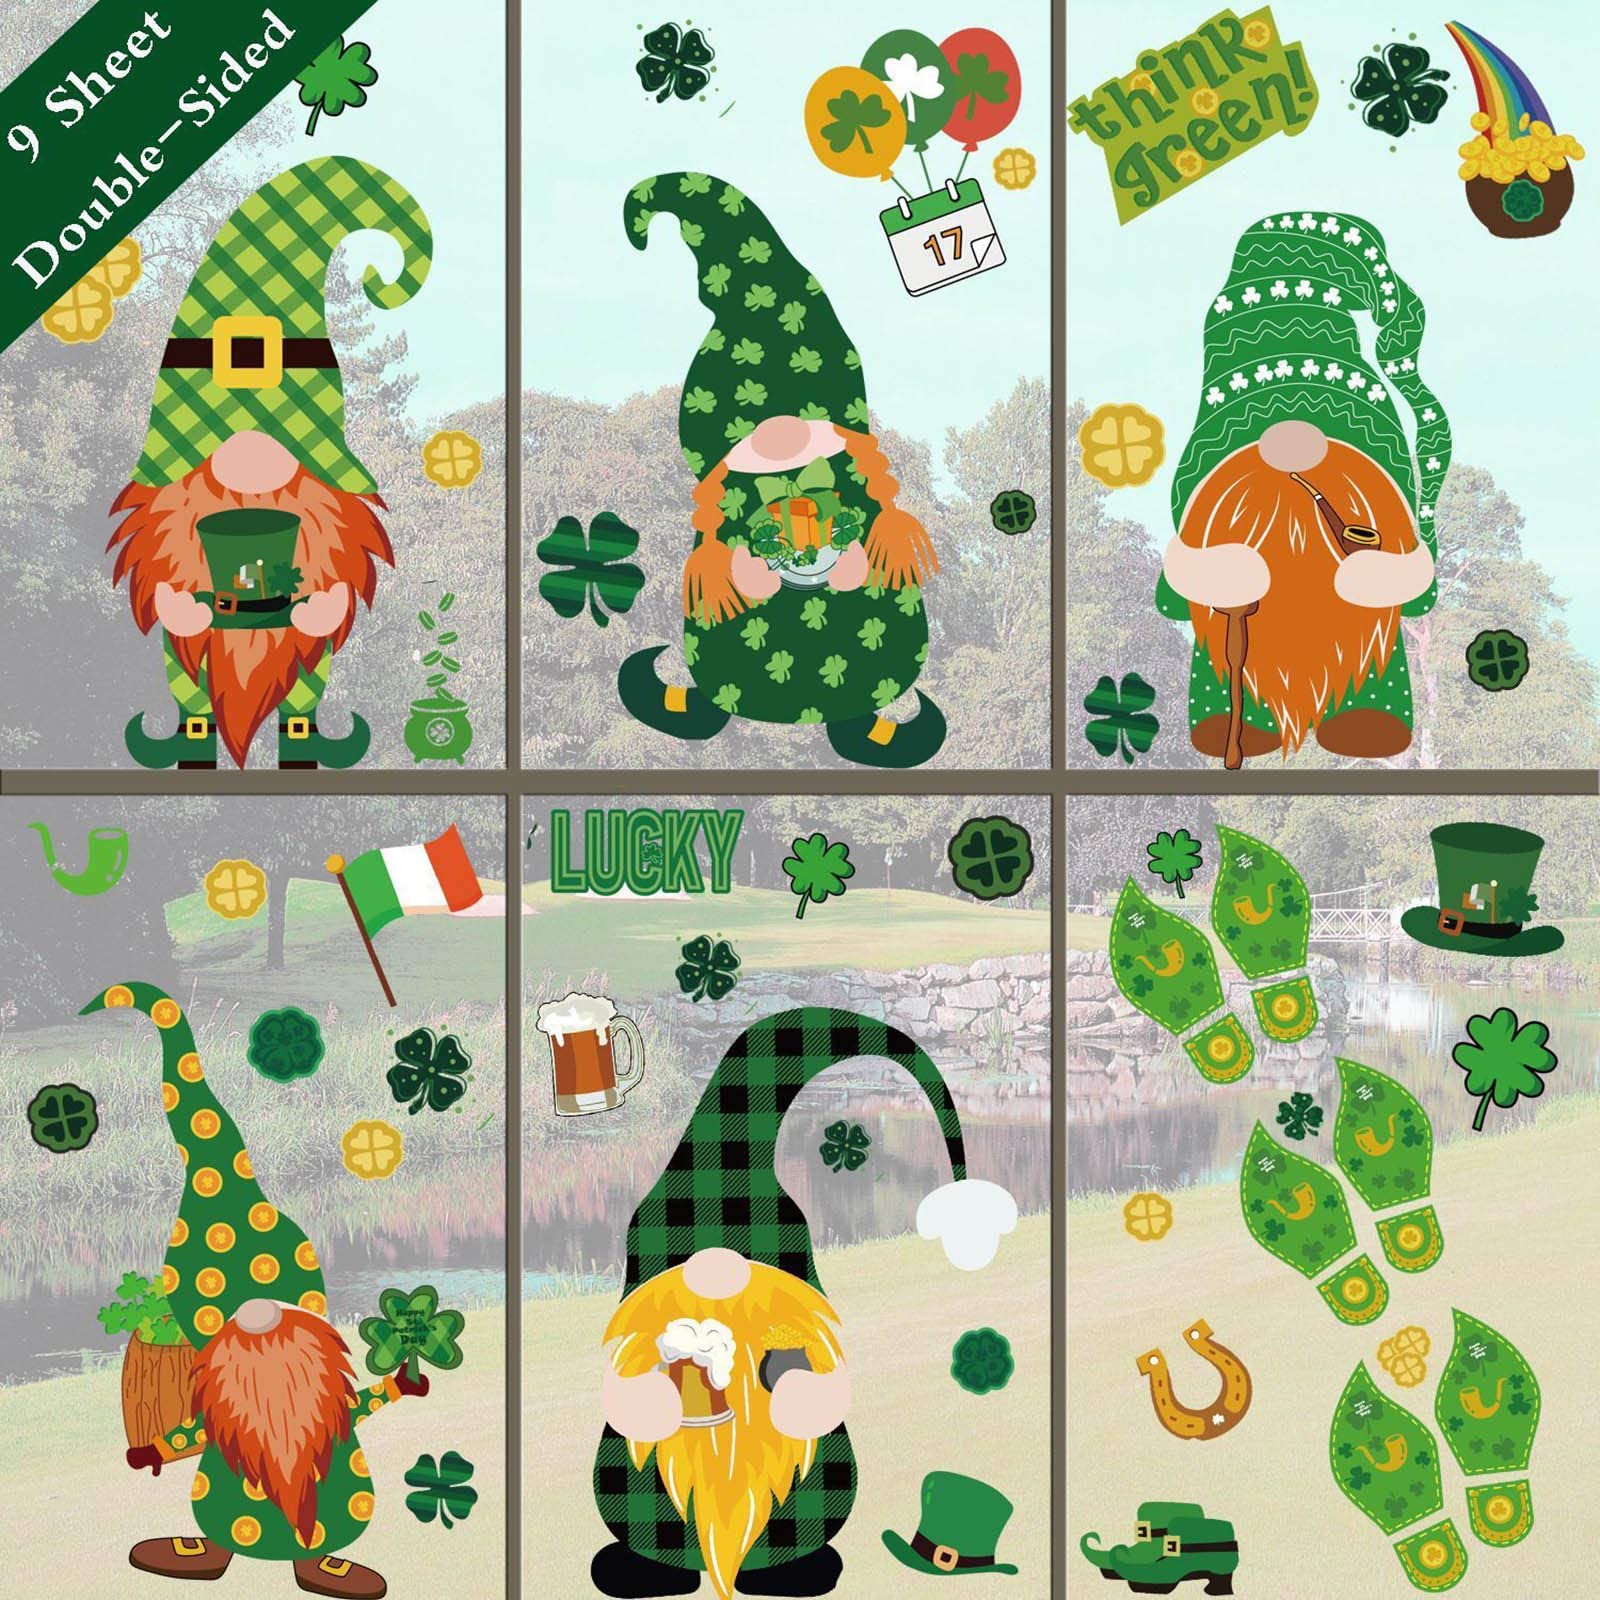 Extra Large Shamrock Irish Gnome Top Hat Gold Coins Decal Stickers for Kids School Home Accessories Party Supplies Gifts,9 Sheets St Patricks Day Decorations Window Clings Decor